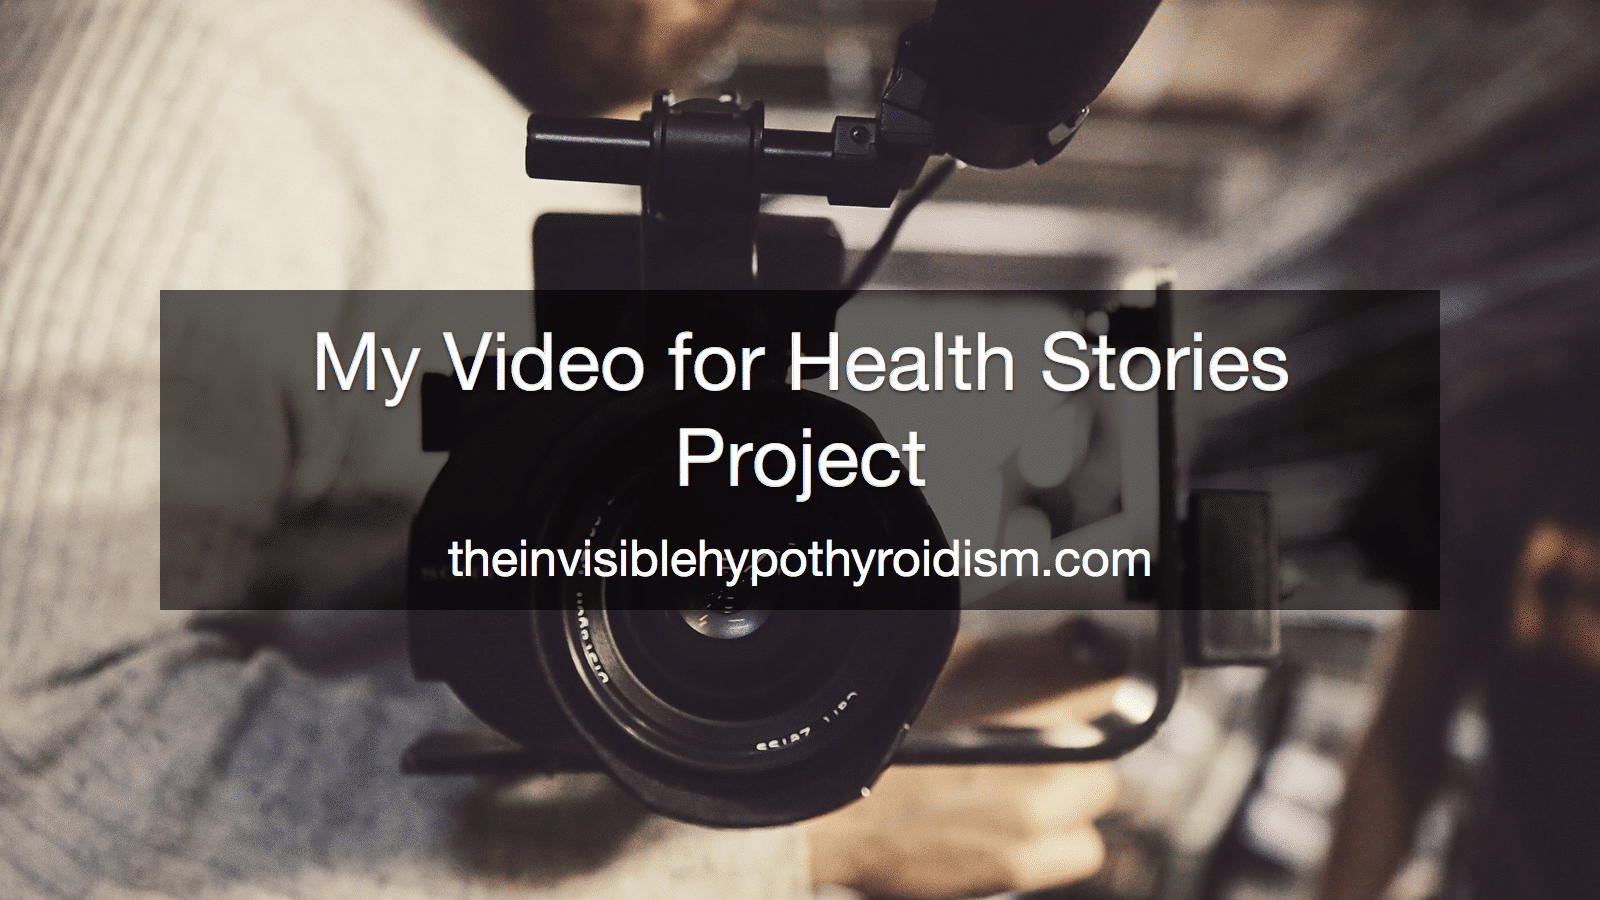 My Video for Health Stories Project